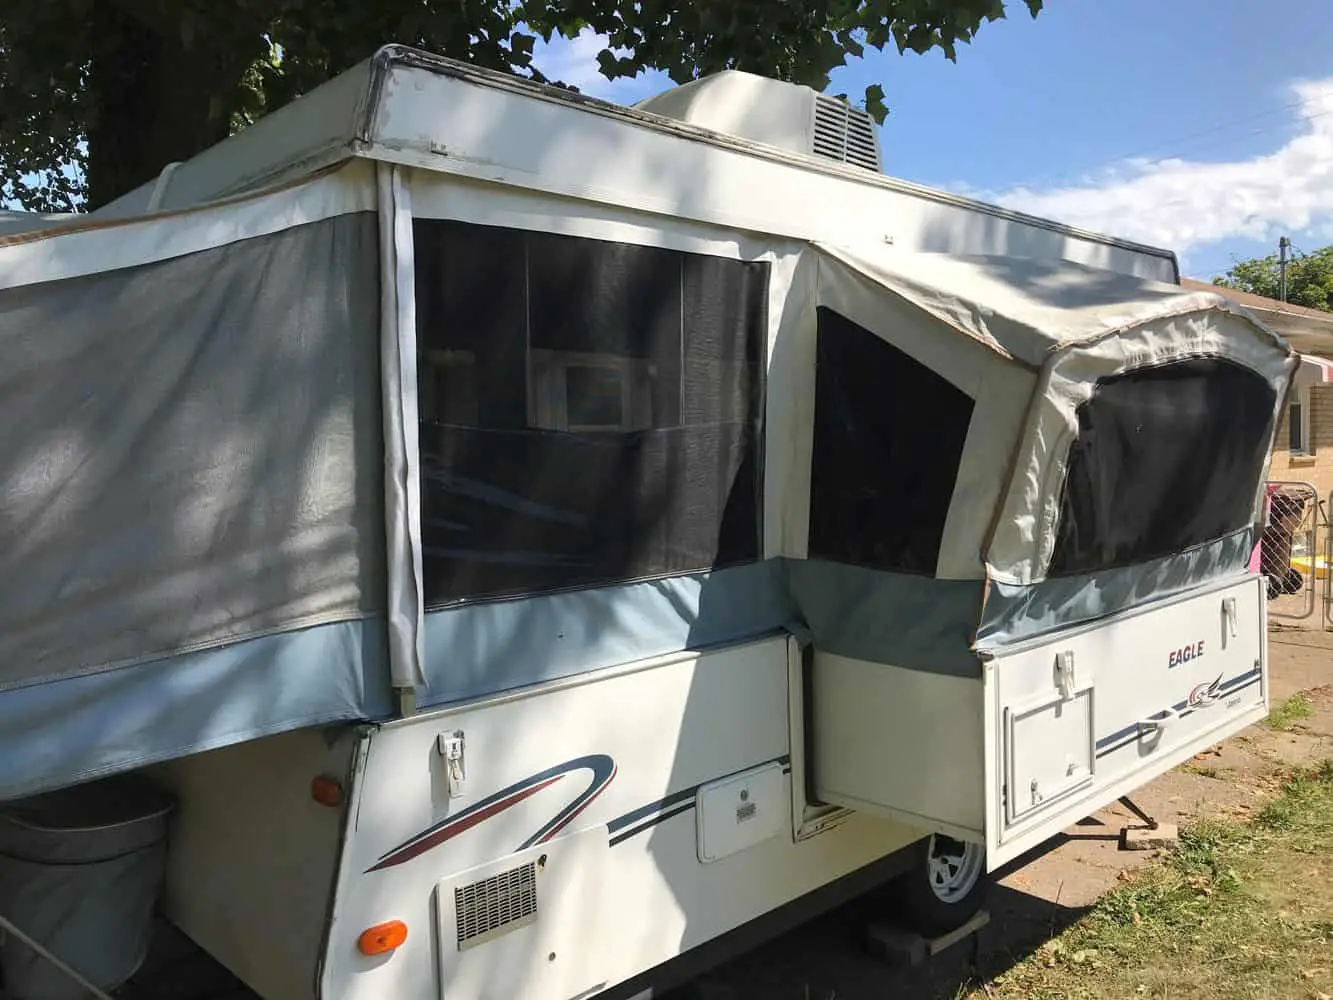 How To Insulate A Pop Up Camper?